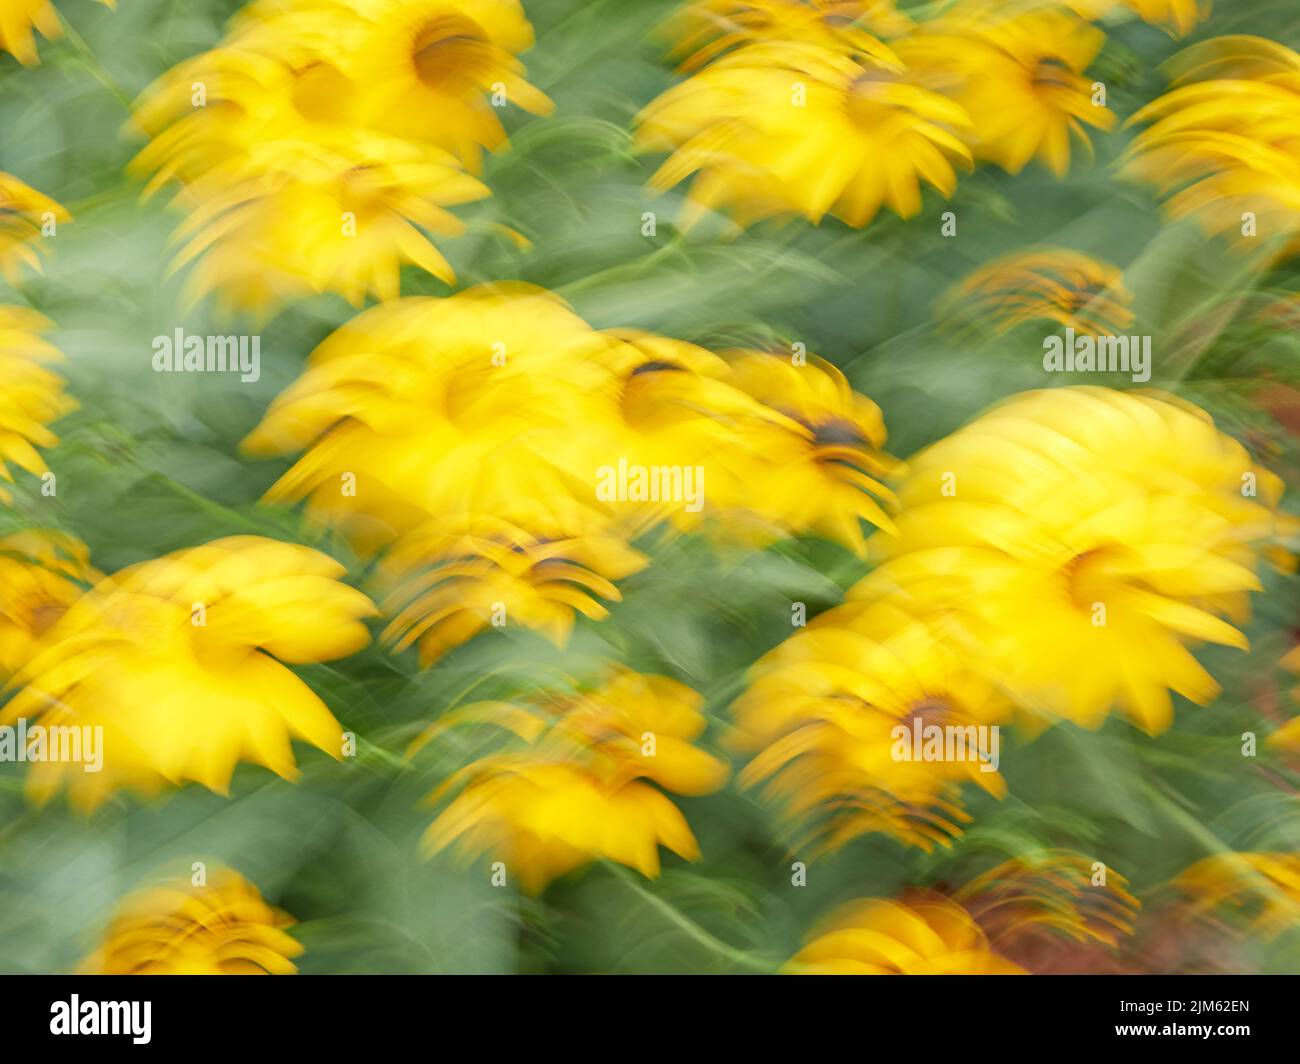 Blurred or blurry yellow flowers, abstract and colorful for a background or abstract pattern or texture. Stock Photo